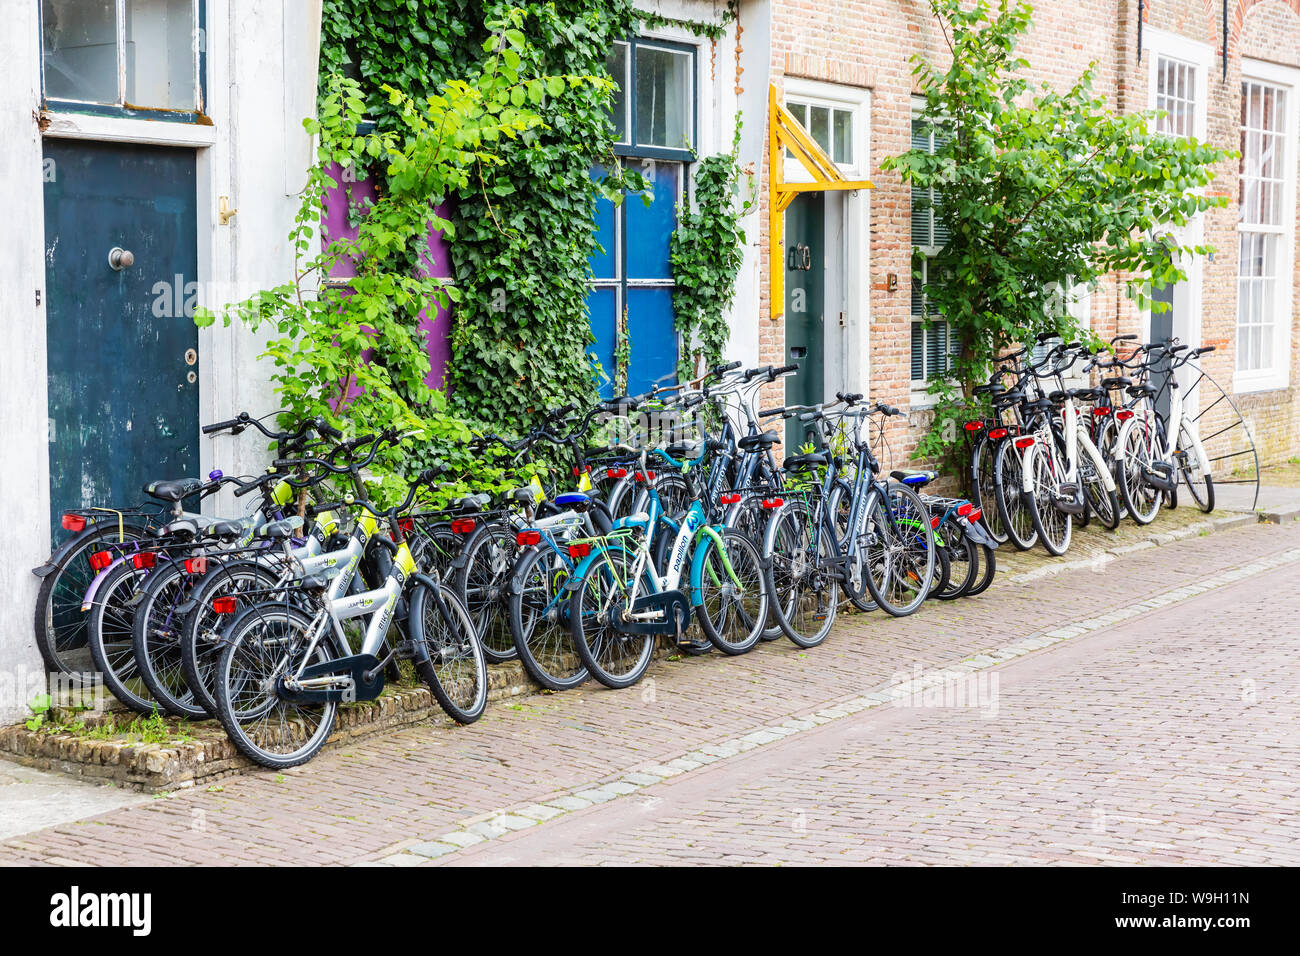 Veere, Netherlands - June 09, 2019: bicycle rental in Veere. Veere is famous for its picturesque old town and a popular destination for day tripper Stock Photo